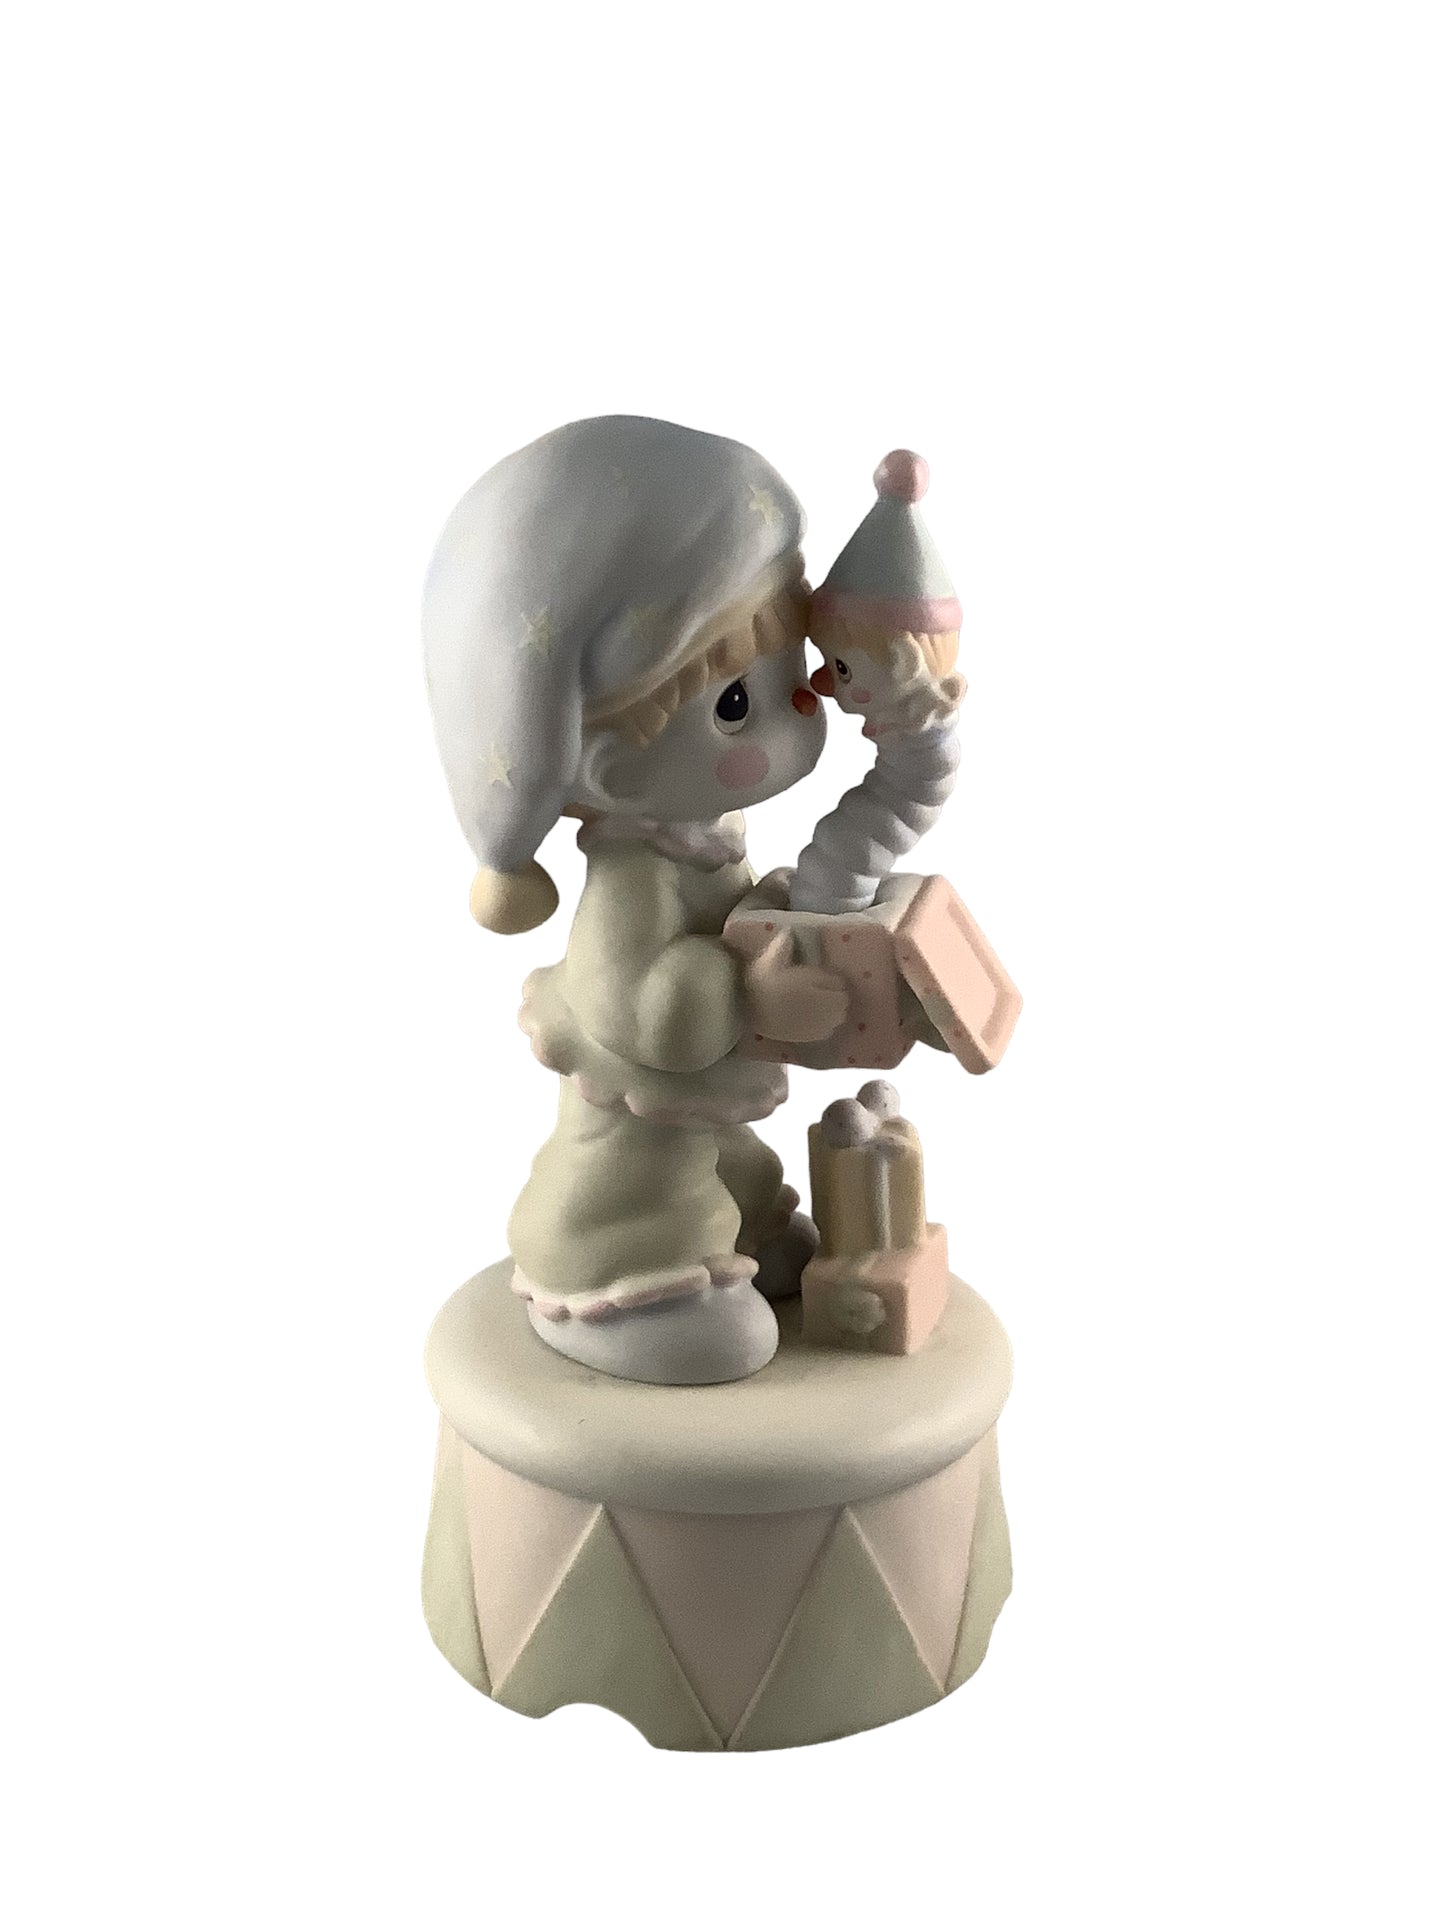 God Sent You Just In Time (Musical) - Precious Moment Figurine